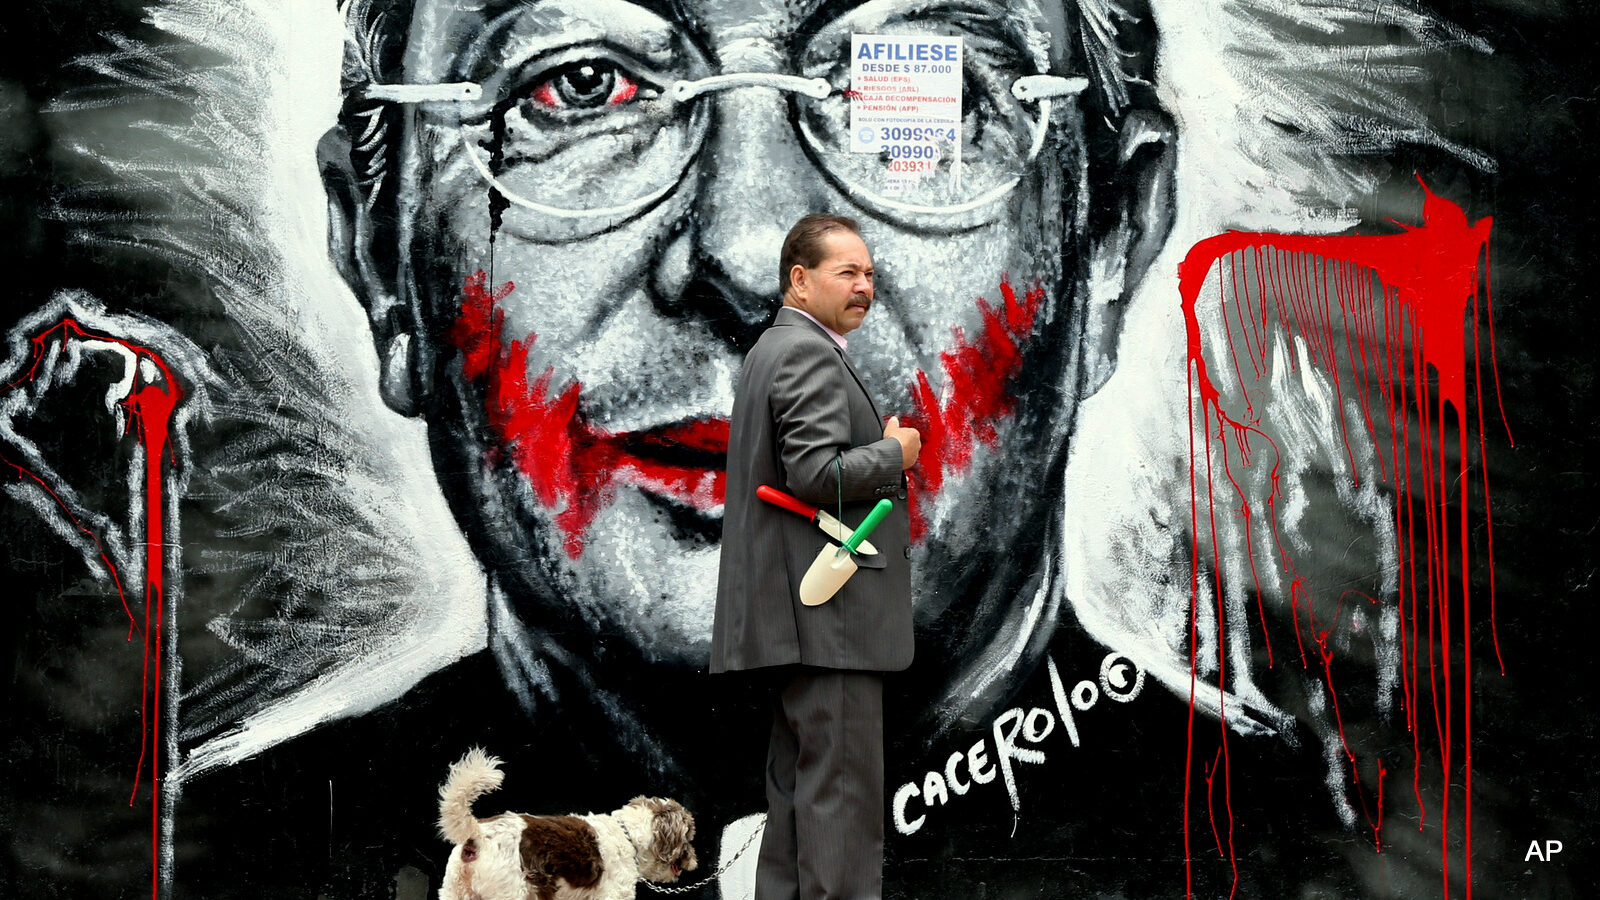 In this March 18, 2015 photo, a man walks his dog next to a mural depicting former President Alvaro Uribe, in Bogota, Colombia. Bogota’s laissez-faire attitude toward graffiti contrasts with that in many other Latin American cities. Buenos Aires, Argentina, last year raised penalties for street art, which it considers to be vandalism. In the Peruvian capital of Lima, the mayor this month had city workers cover up several down murals by graffiti artists.